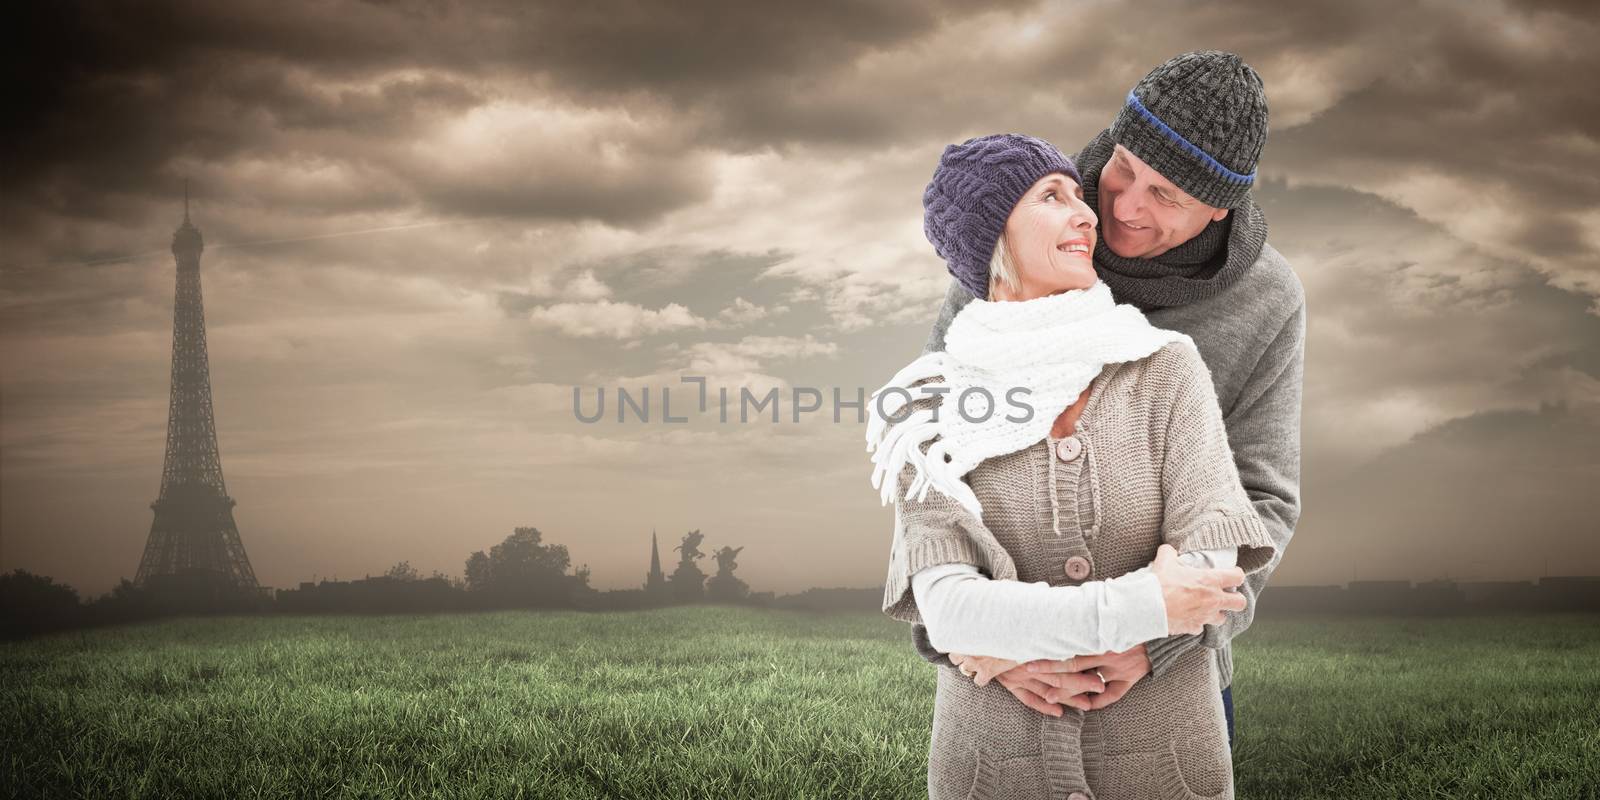 Happy mature couple in winter clothes embracing against paris under cloudy sky